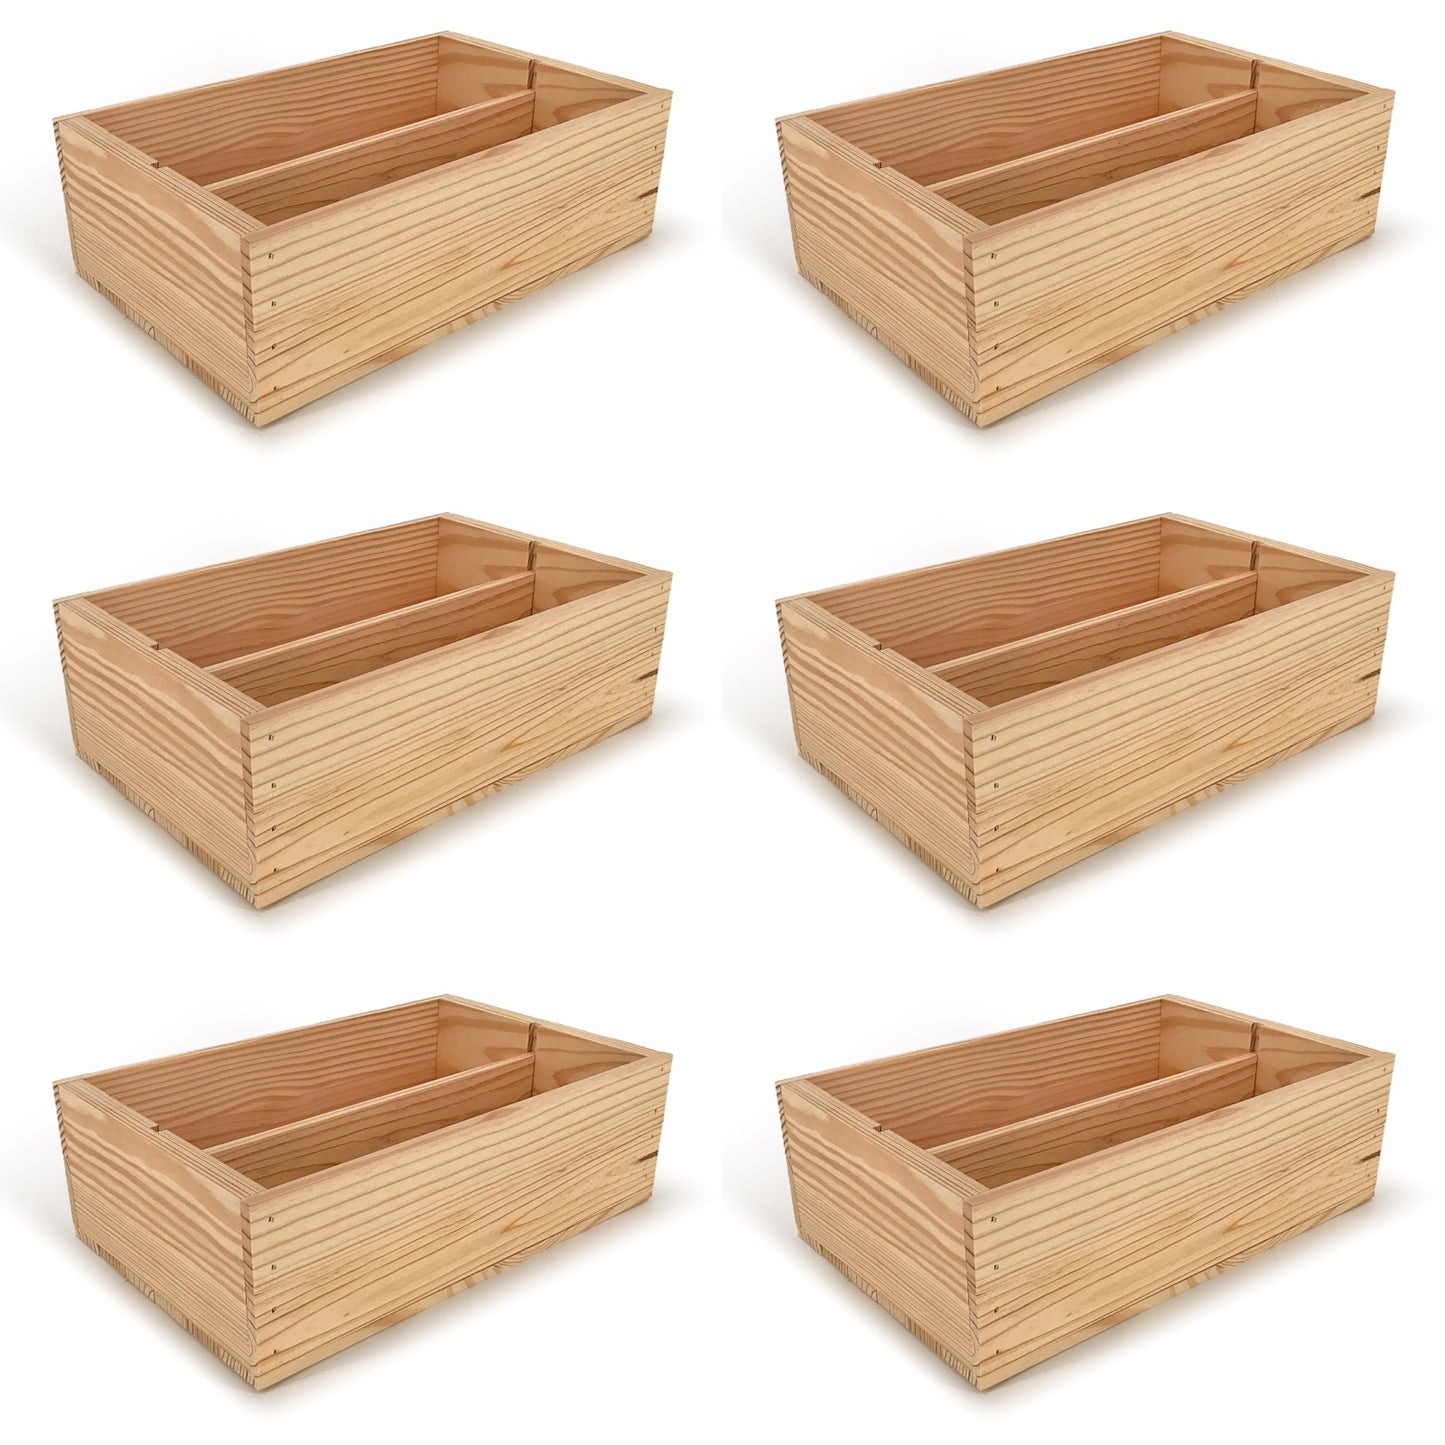 6 Two Bottle Wine Crate Boxes 14x9x4.5, 6-WB-14-9-4.5-NX-NW-NL,  12-WB-14-9-4.5-NX-NW-NL,  24-WB-14-9-4.5-NX-NW-NL,  48-WB-14-9-4.5-NX-NW-NL,  96-WB-14-9-4.5-NX-NW-NL